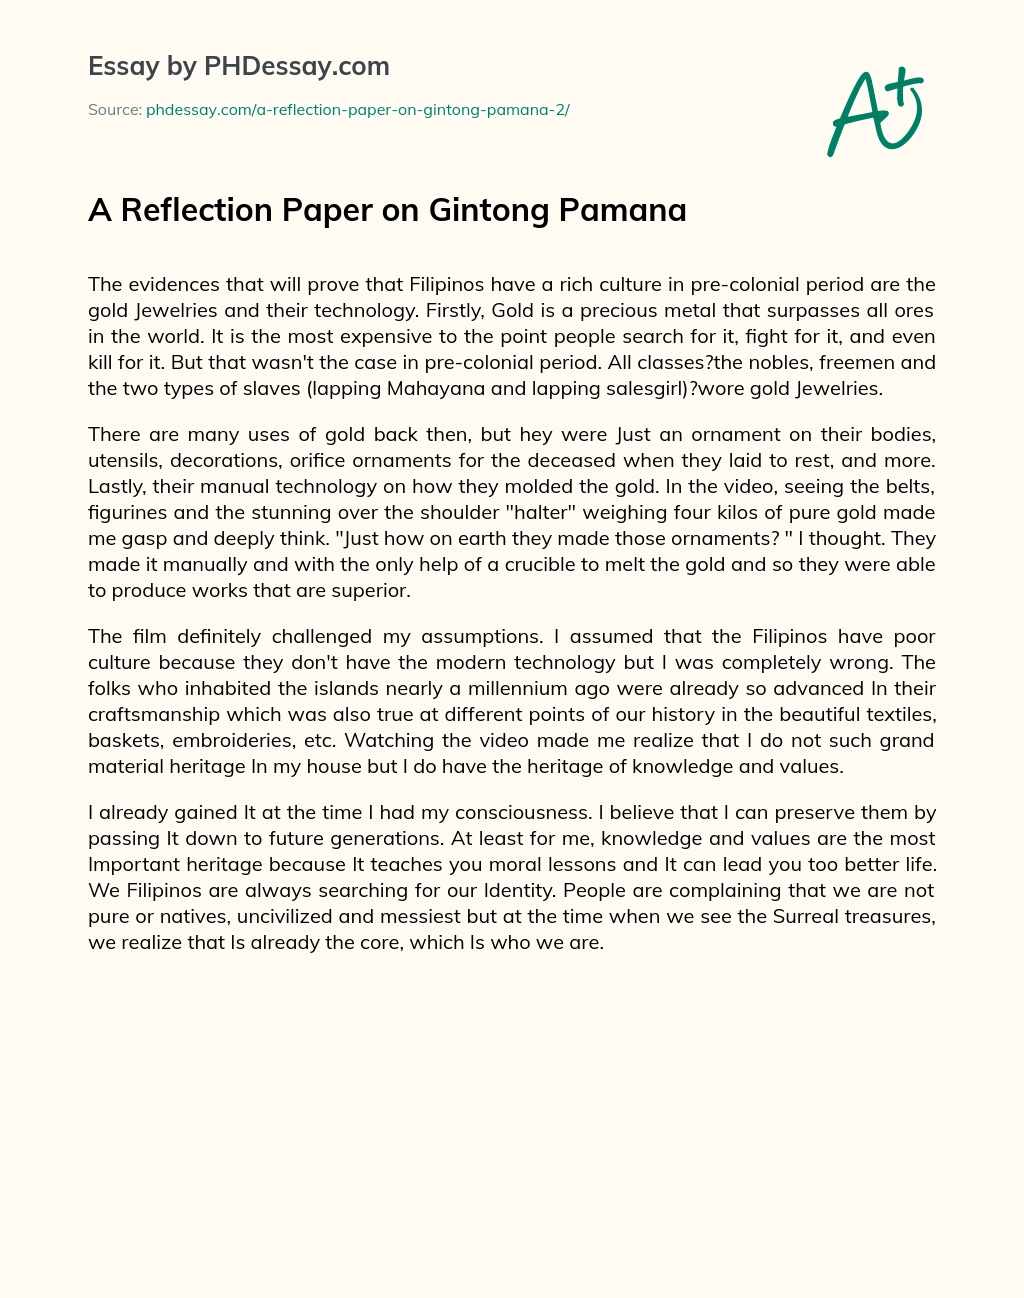 A Reflection Paper on Gintong Pamana essay